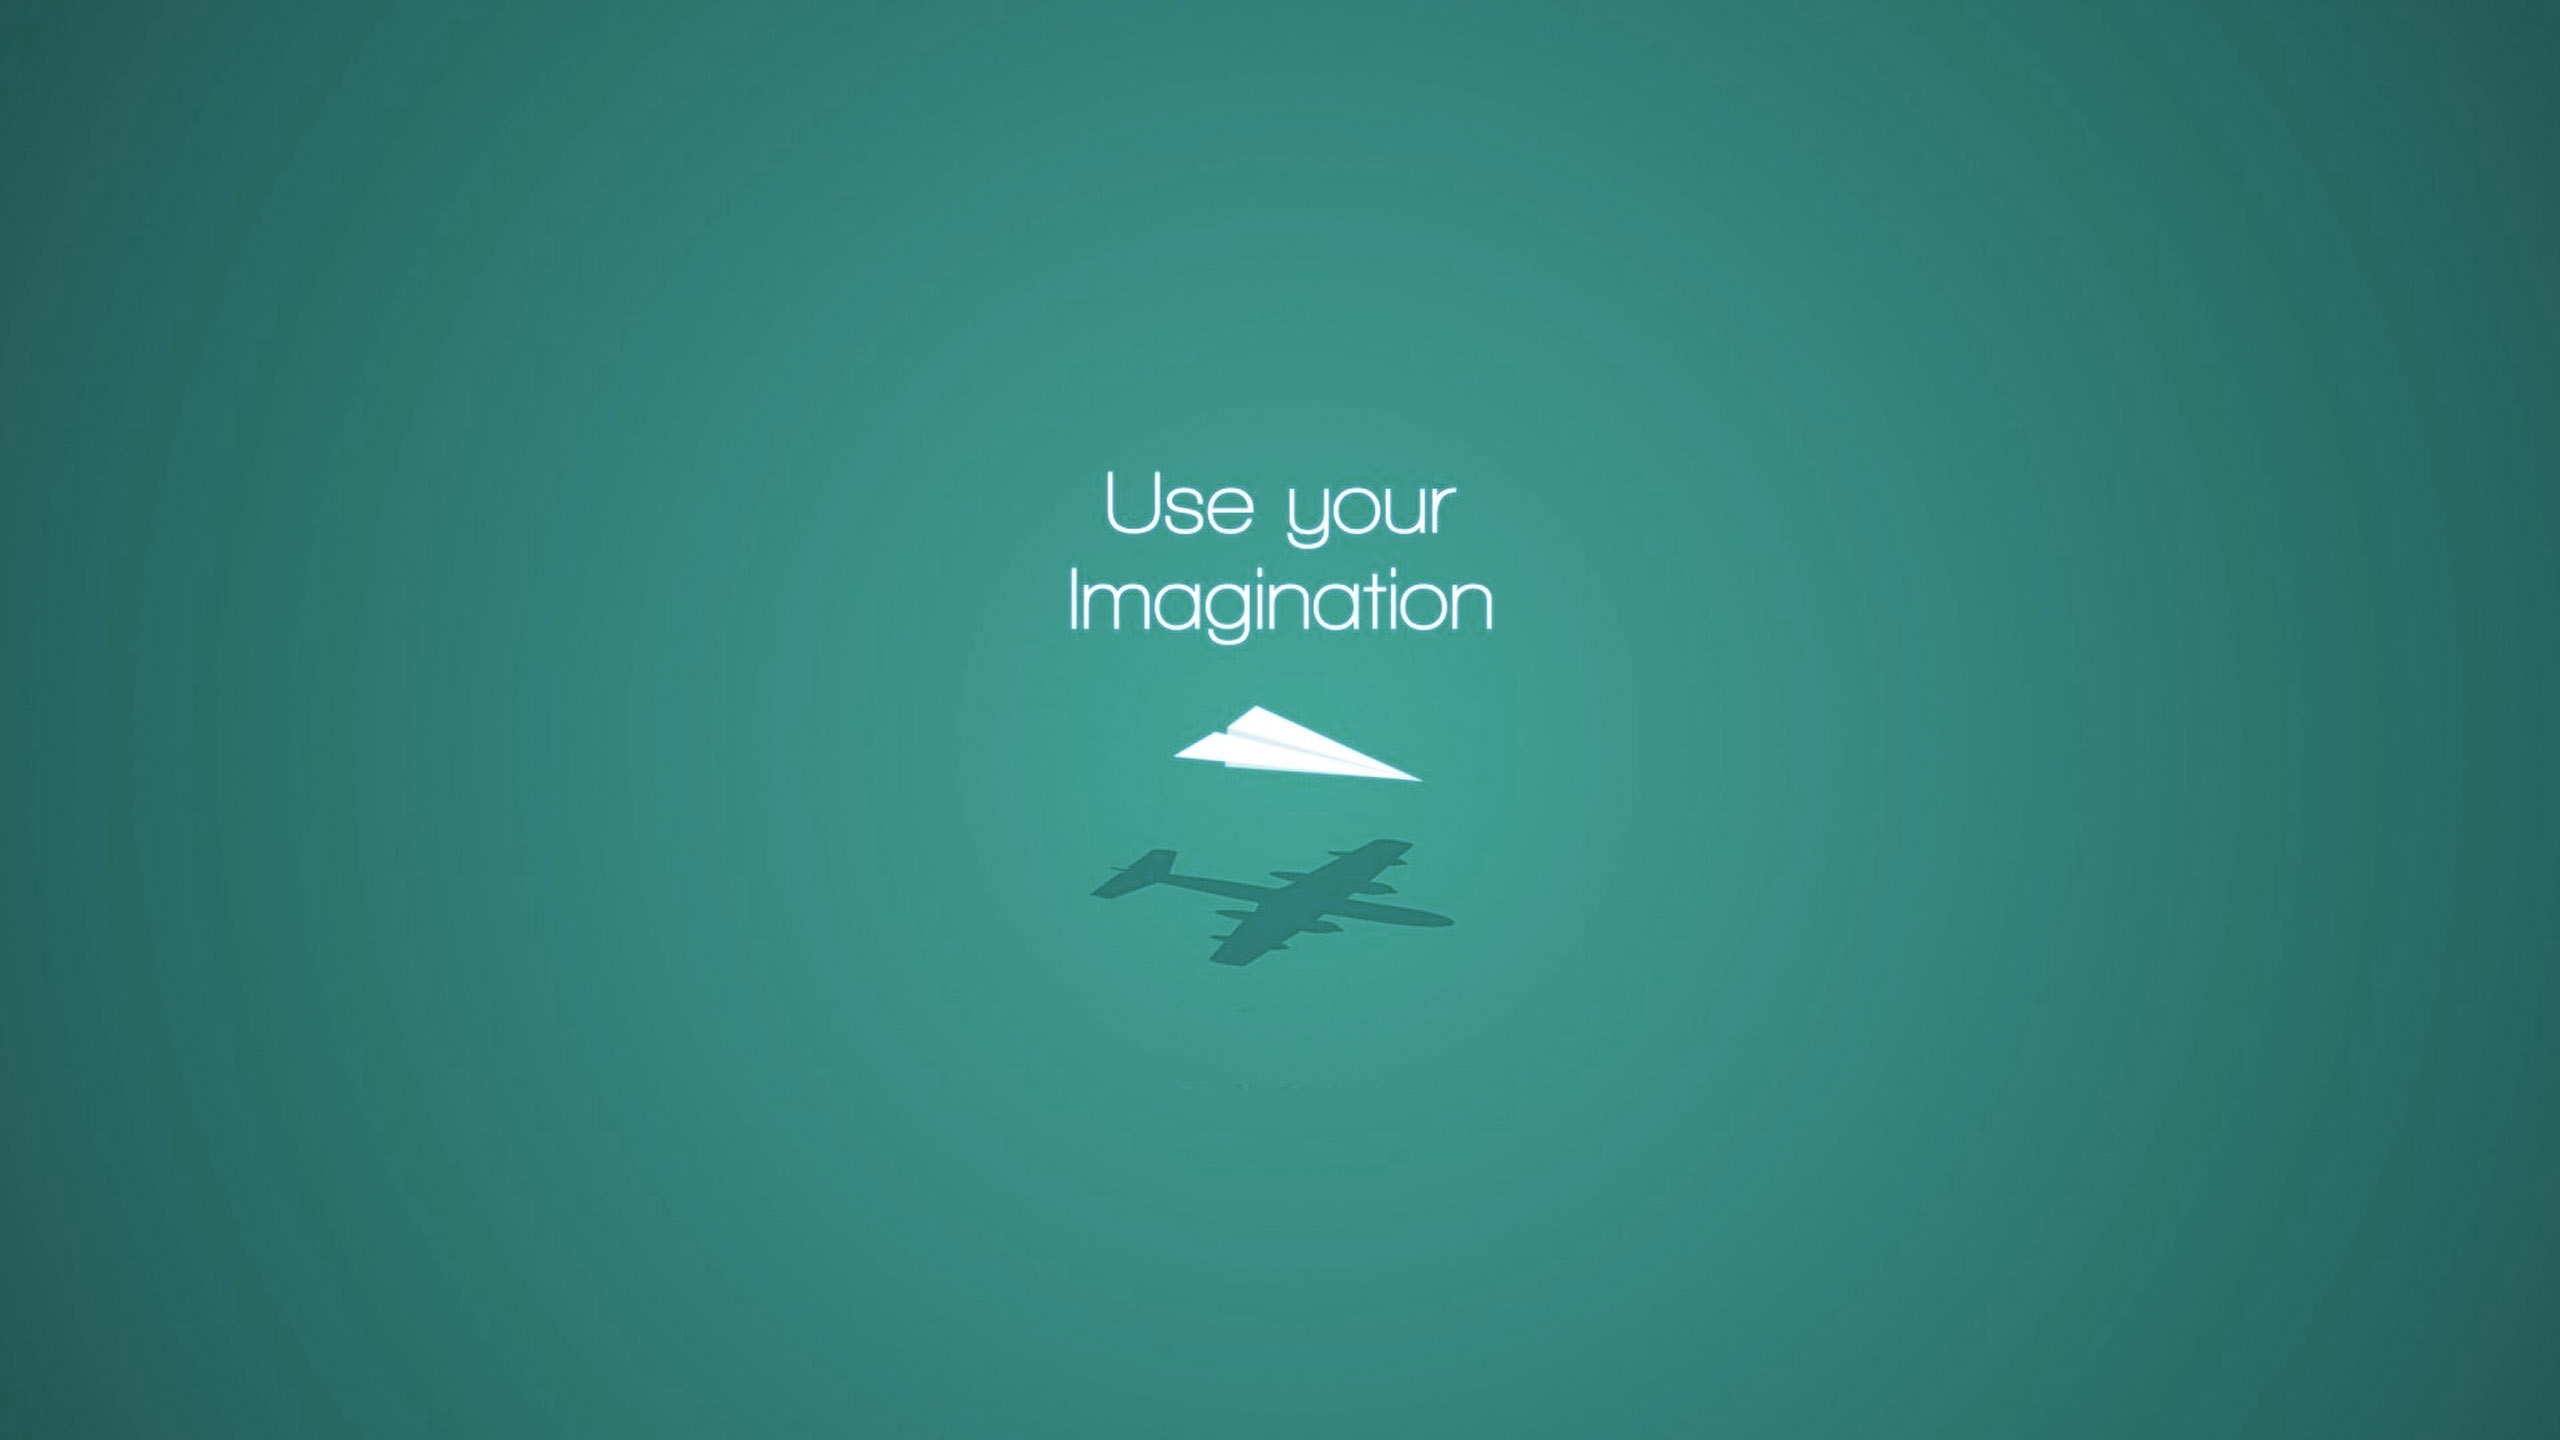 HD Wallpaper Use Your Imagination Vlog Functional